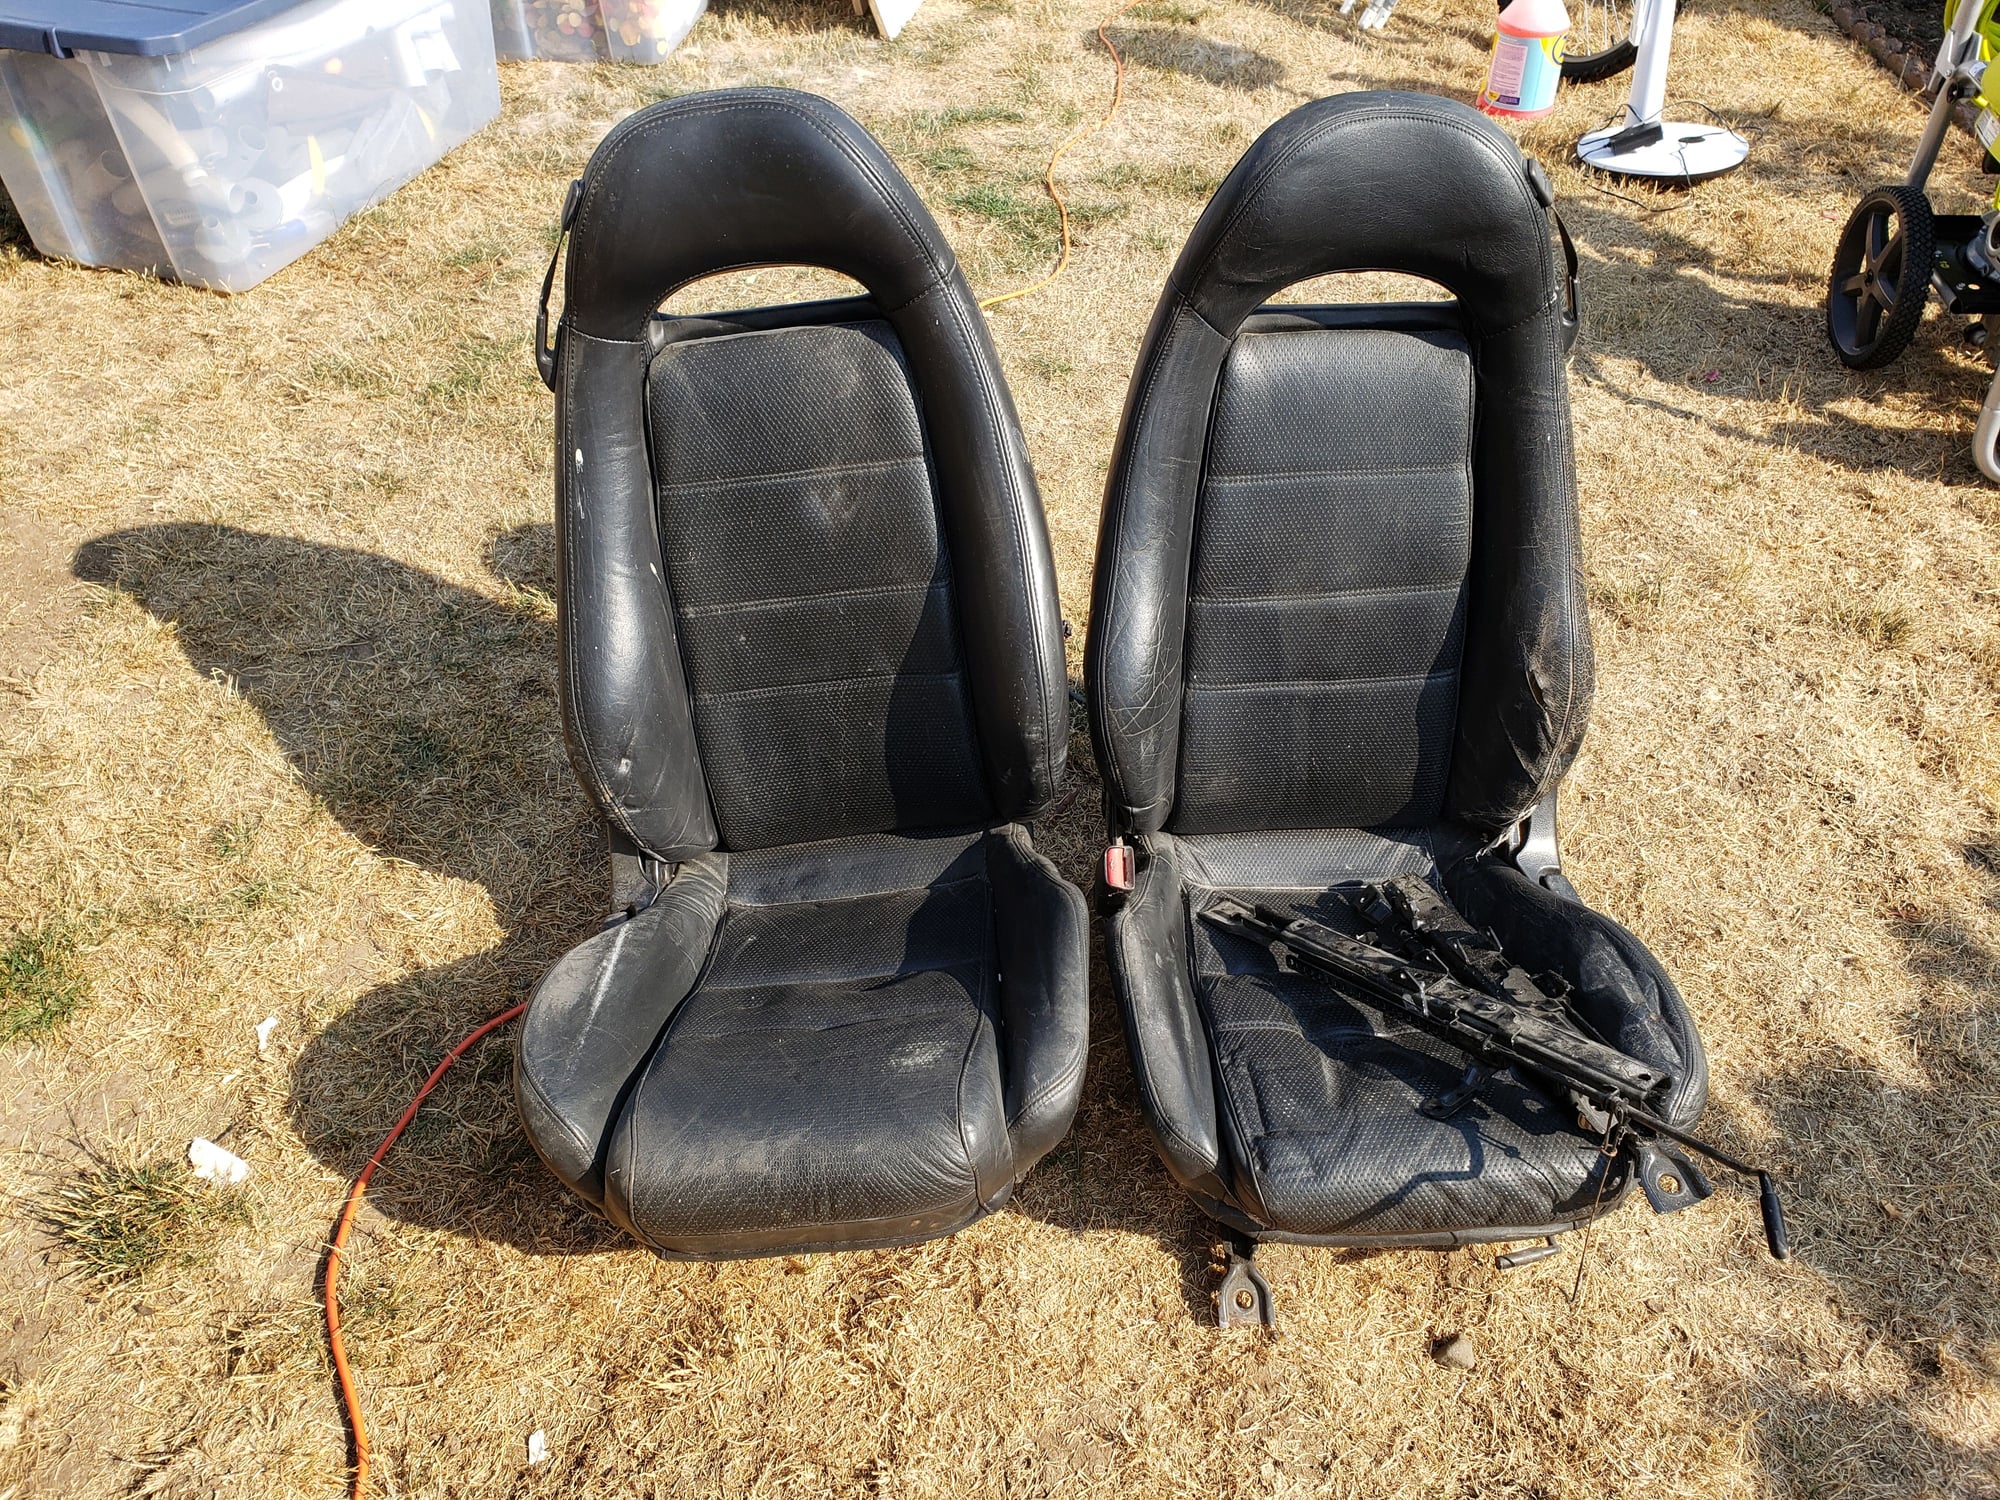 Interior/Upholstery - FD seats - Used - 1993 to 1995 Mazda RX-7 - Springfield, OR 97478, United States